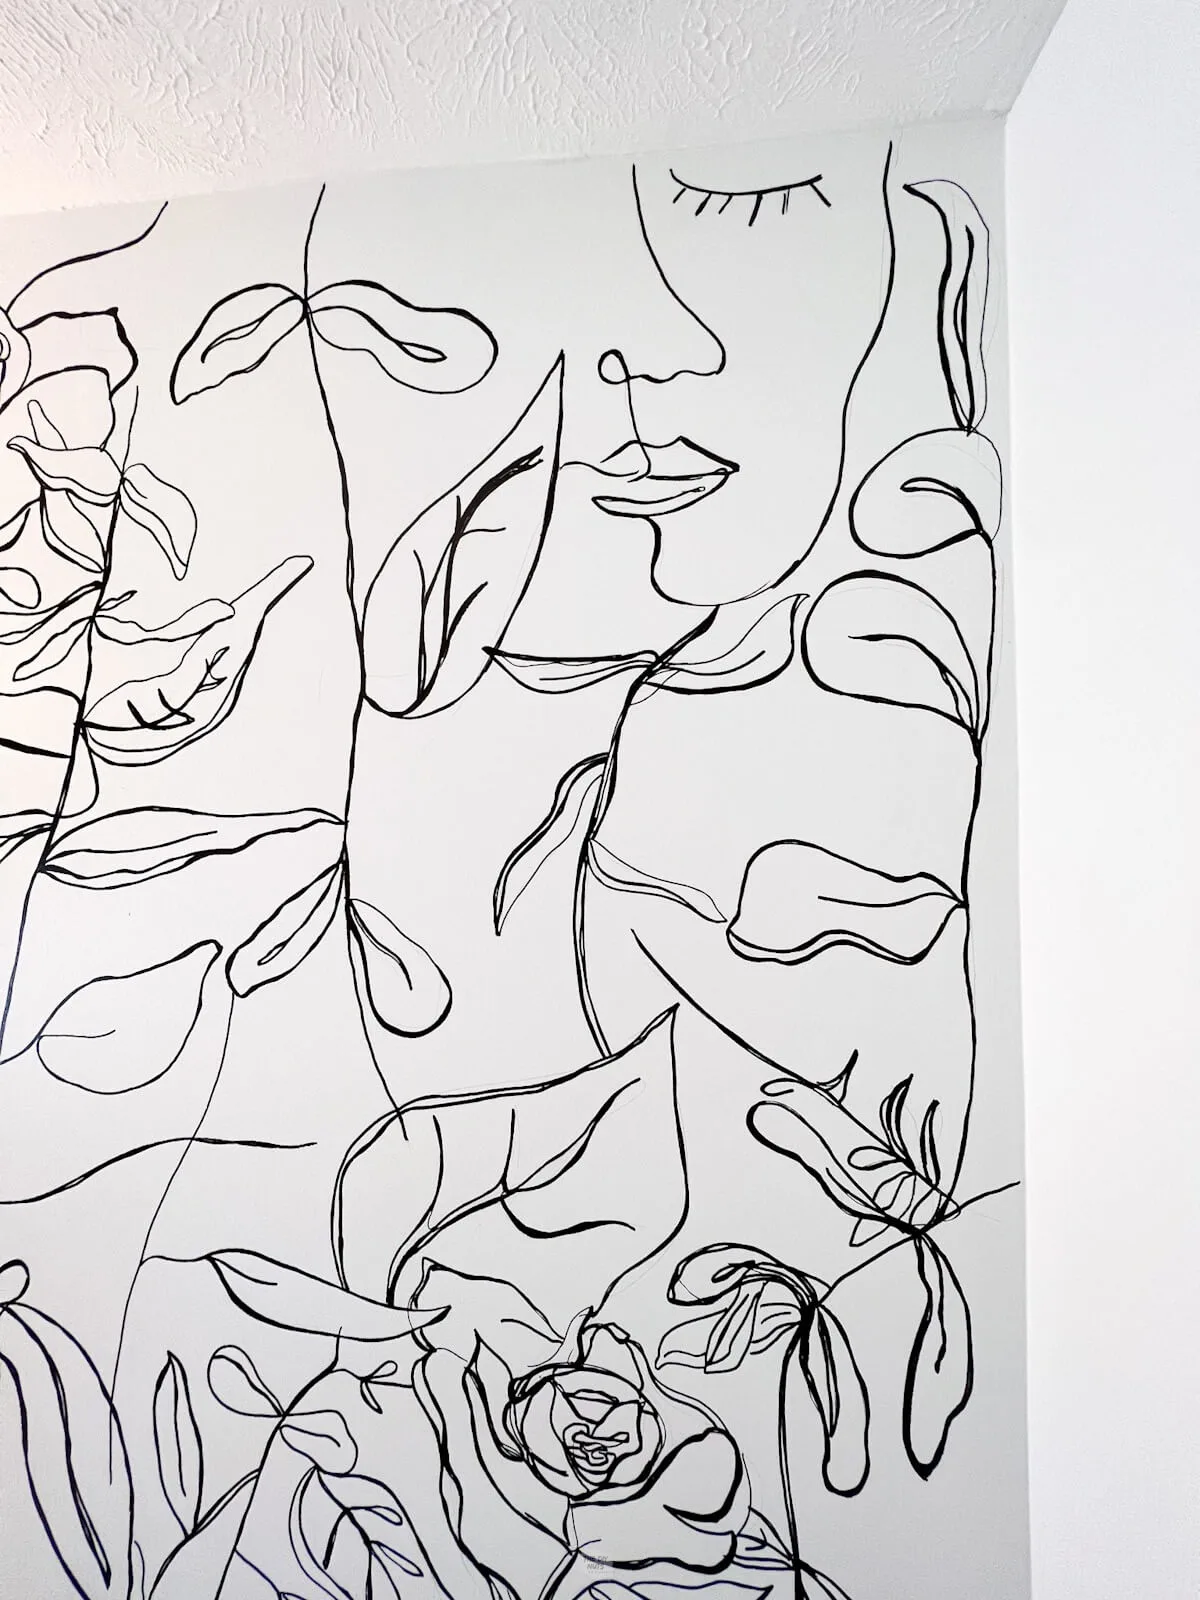 corner of a room with white walls and unique black line drawings of flowers, plants and a contour face.